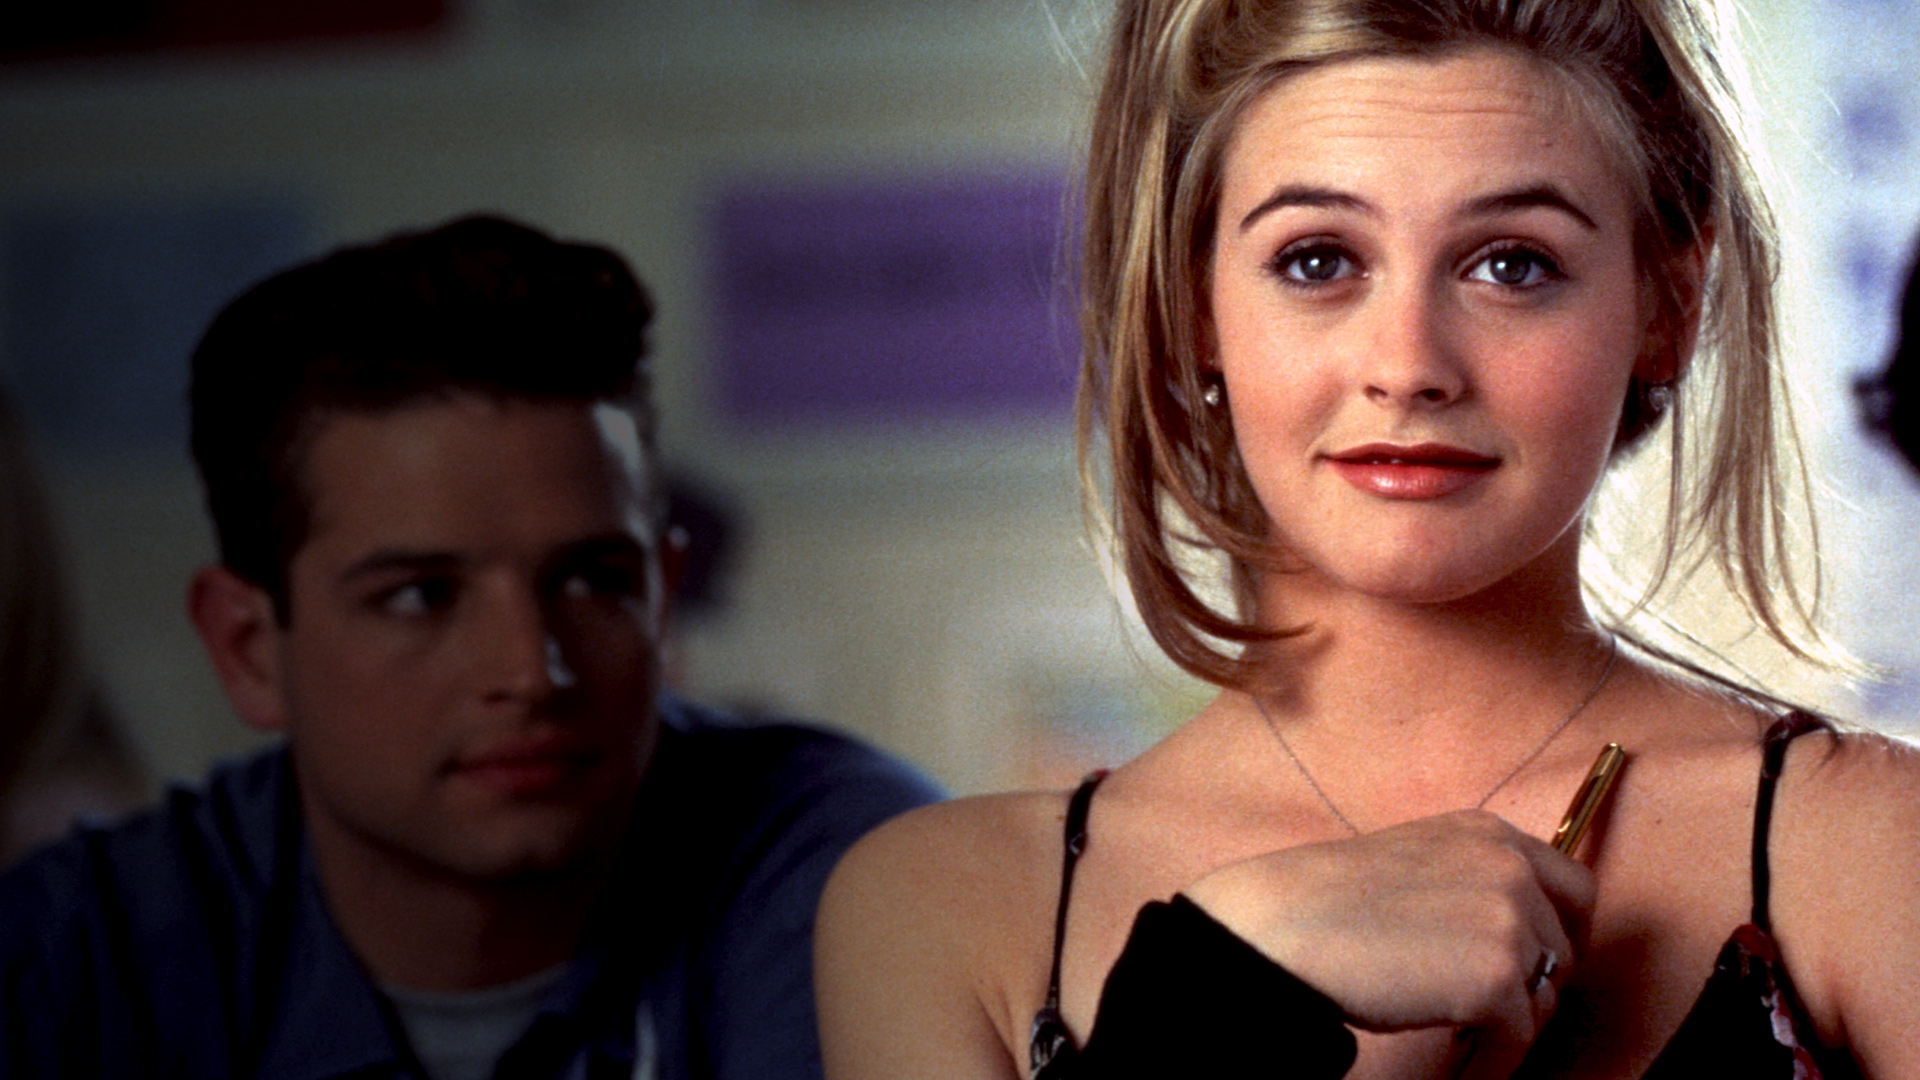 Clueless' TV reboot confirmed to land on NBC's Peacock streaming service